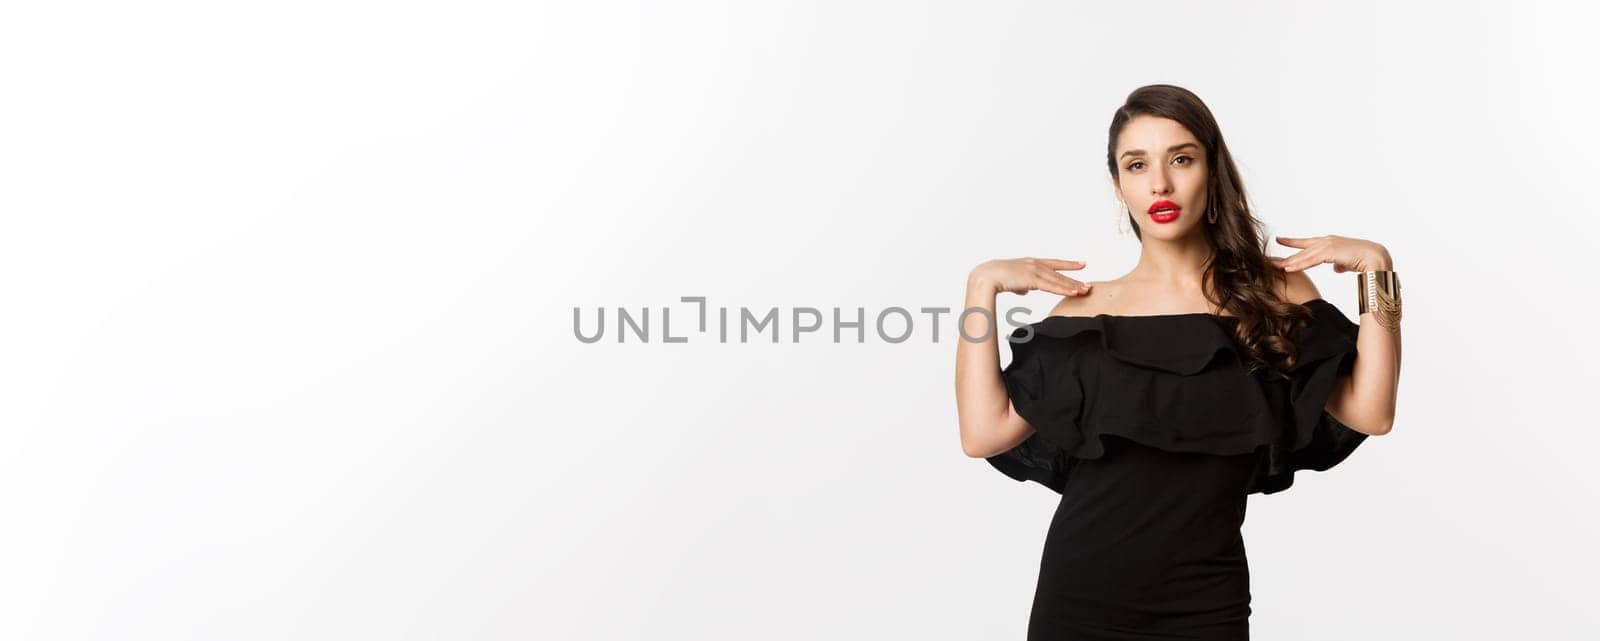 Confident and stylish woman in black elegant dress, looking sassy at camera, standing over white background.